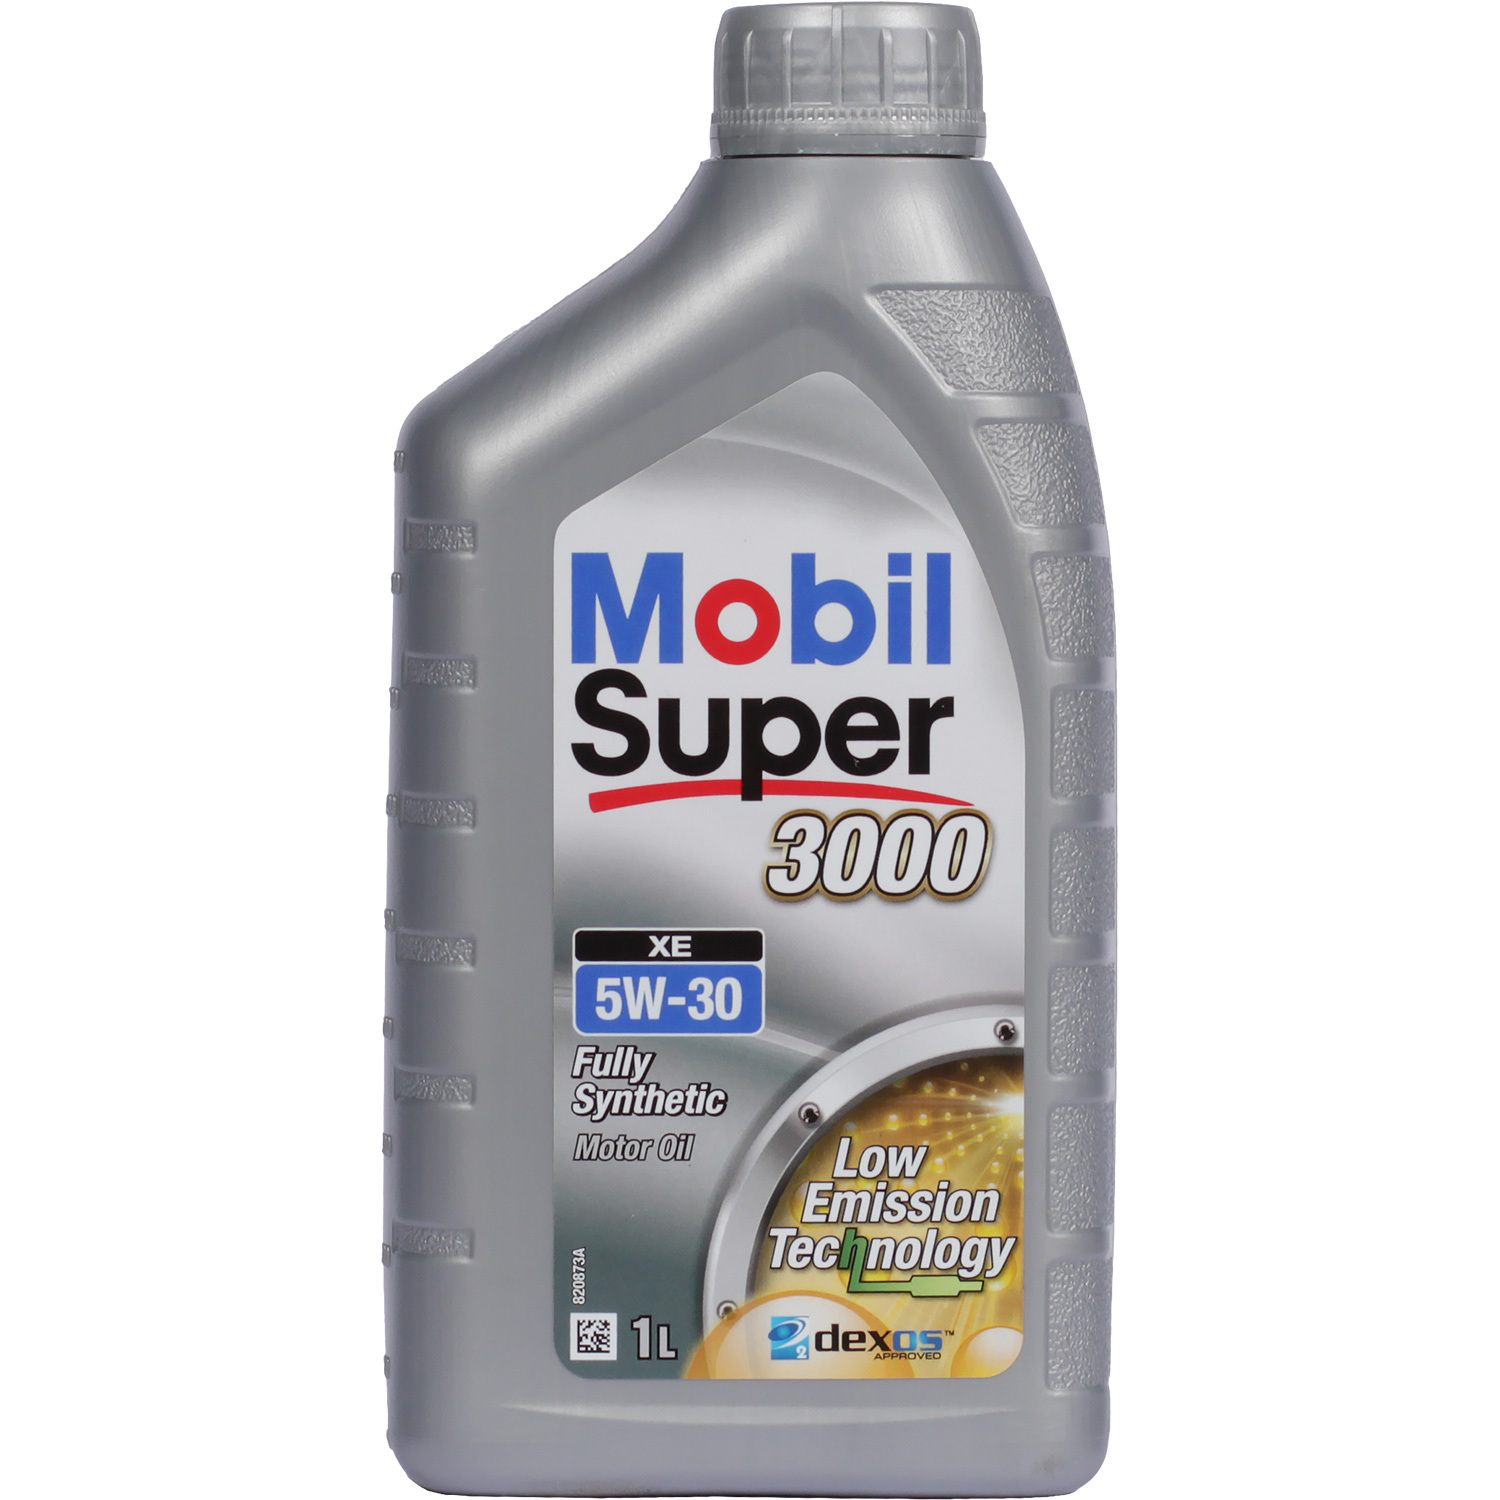 Mobil Моторное масло Mobil Super 3000 XE 5W-30, 1 л